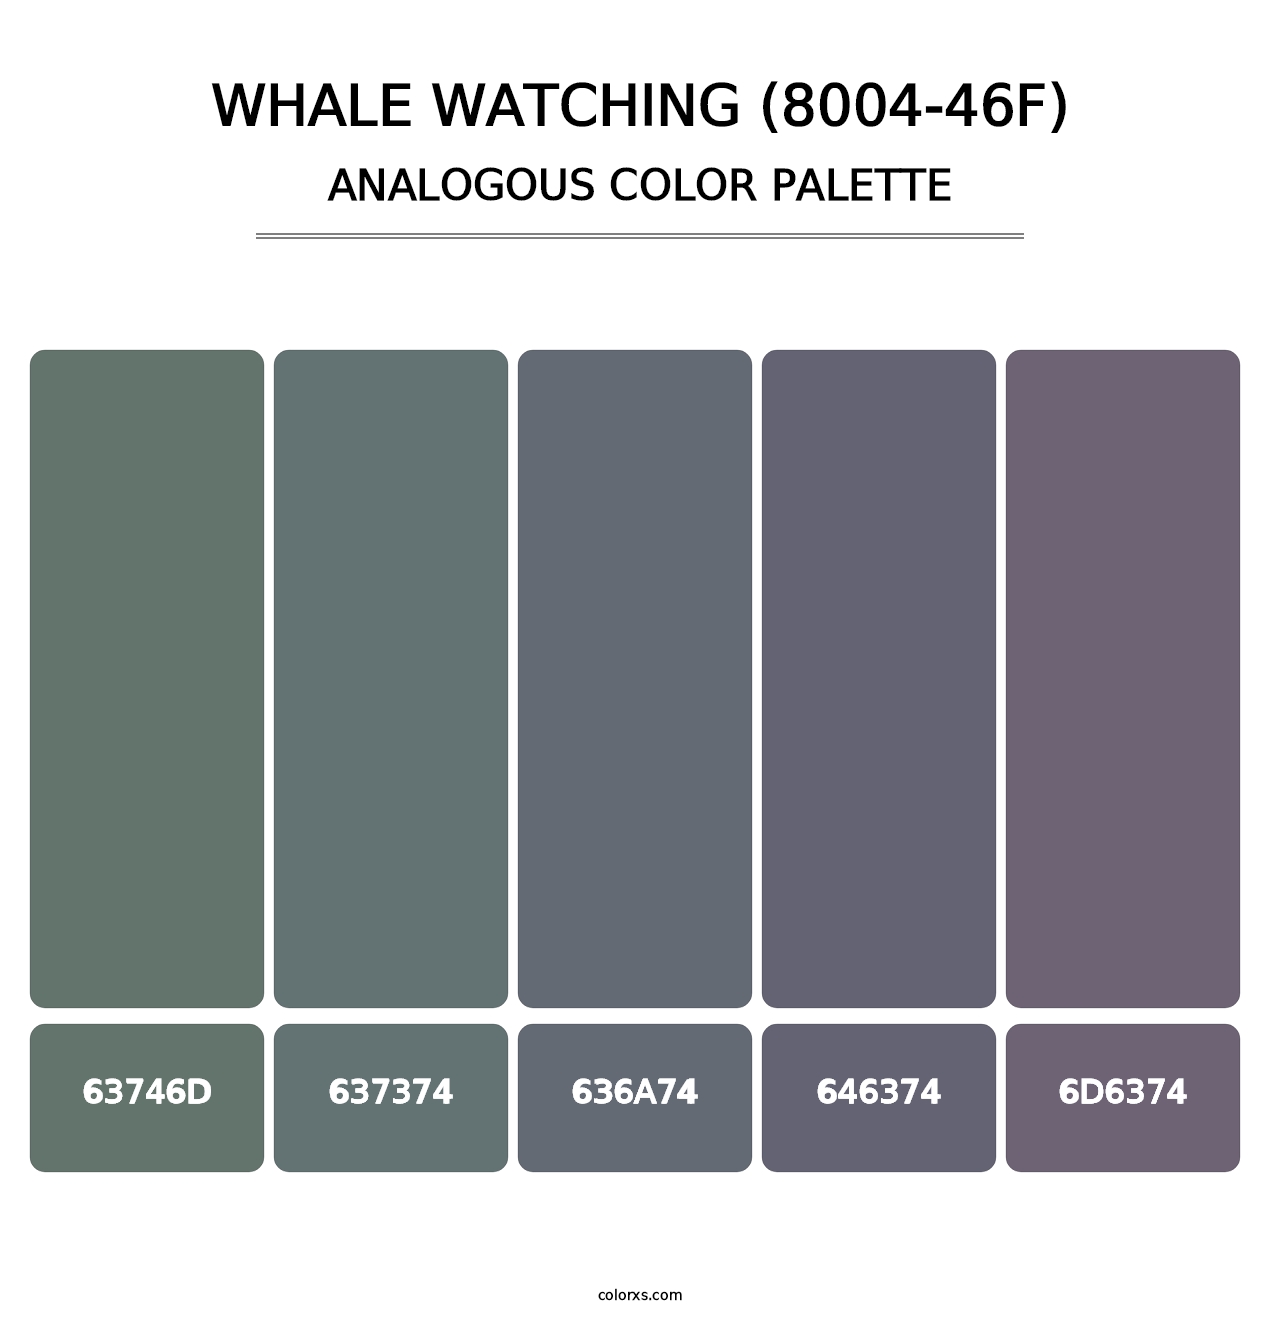 Whale Watching (8004-46F) - Analogous Color Palette